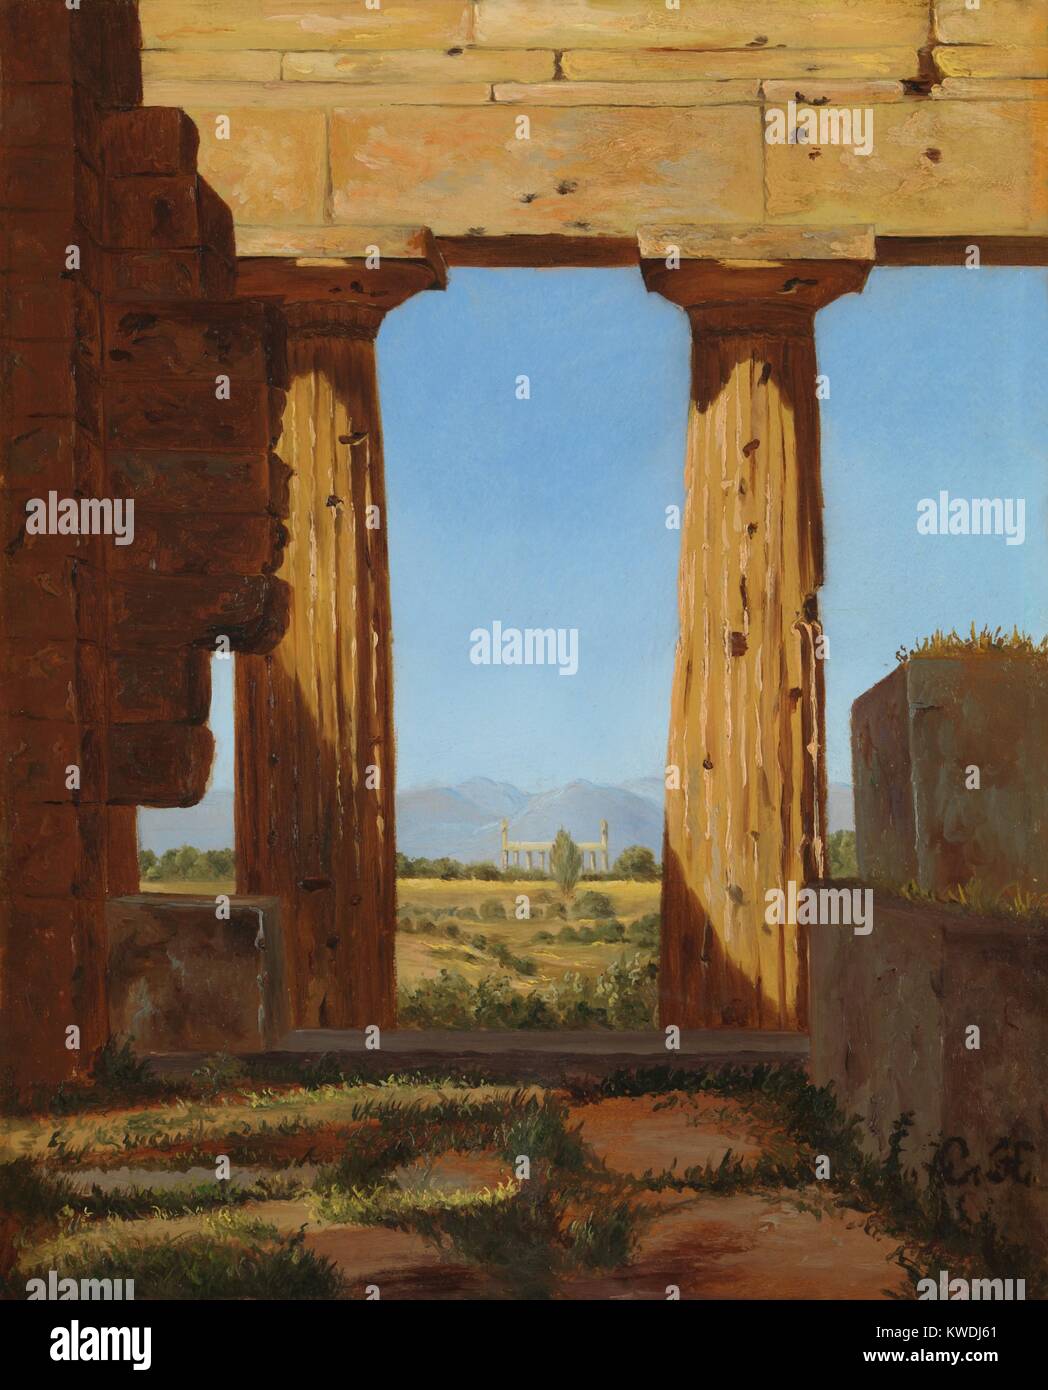 COLUMNS OF THE TEMPLE OF NEPTURE AT PAESTUM, by Constantin Hansen, 1838, Danish oil painting. Hansen painted the 6th century BCE Greek complex at Paestum, Italy. This view is from the interior of the Temple of Neptune, with its fluted Doric columns framing the distant Temple of Athena (BSLOC 2017 9 144) Stock Photo